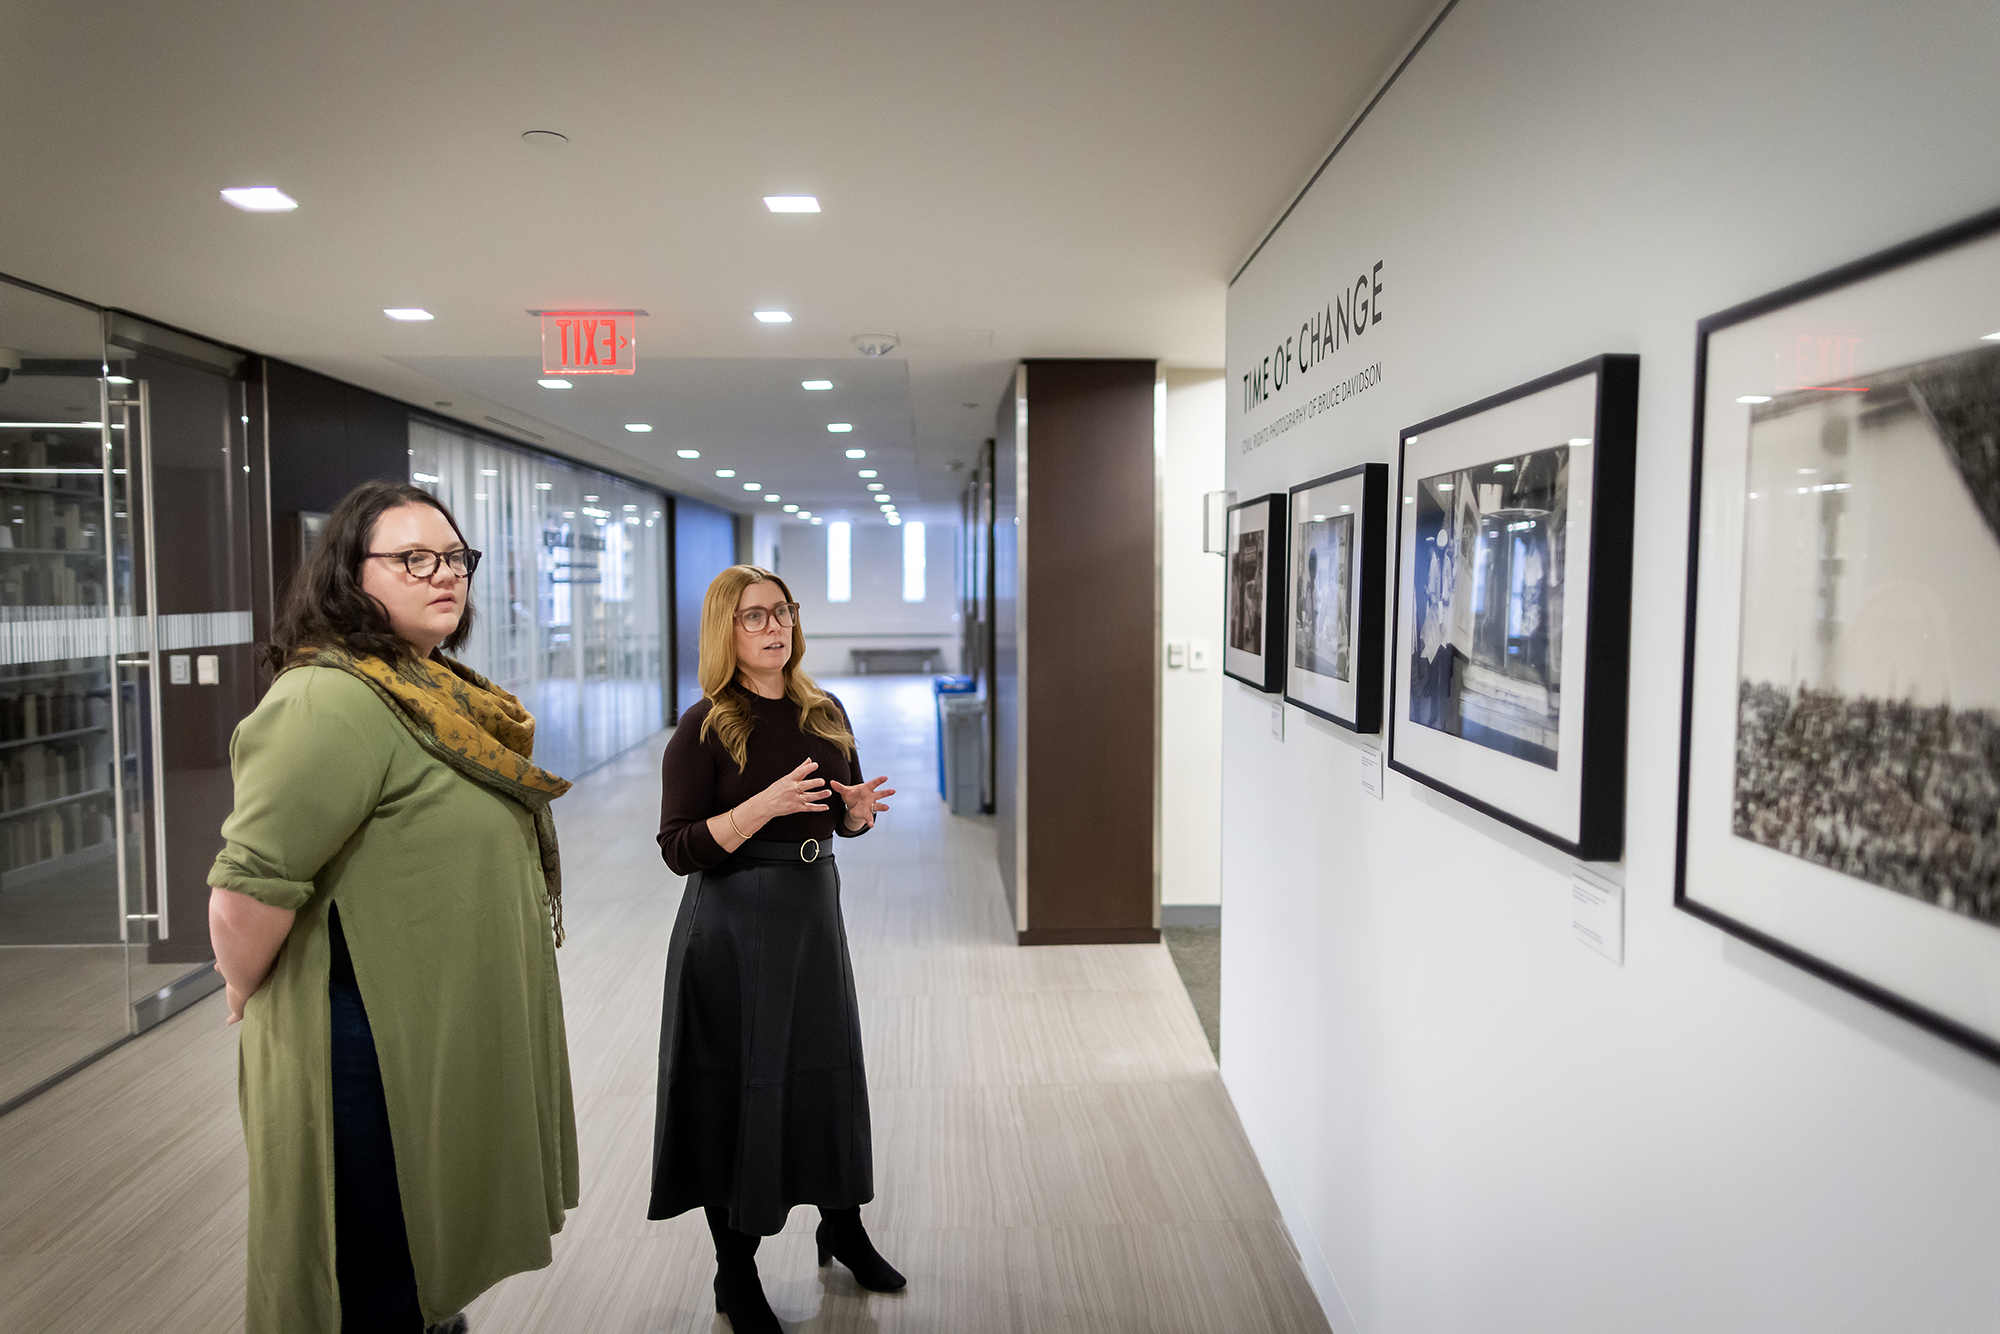 Brittany Merriam and Lynn Dolby standing in hallway in Libraries looking at photographs on wall